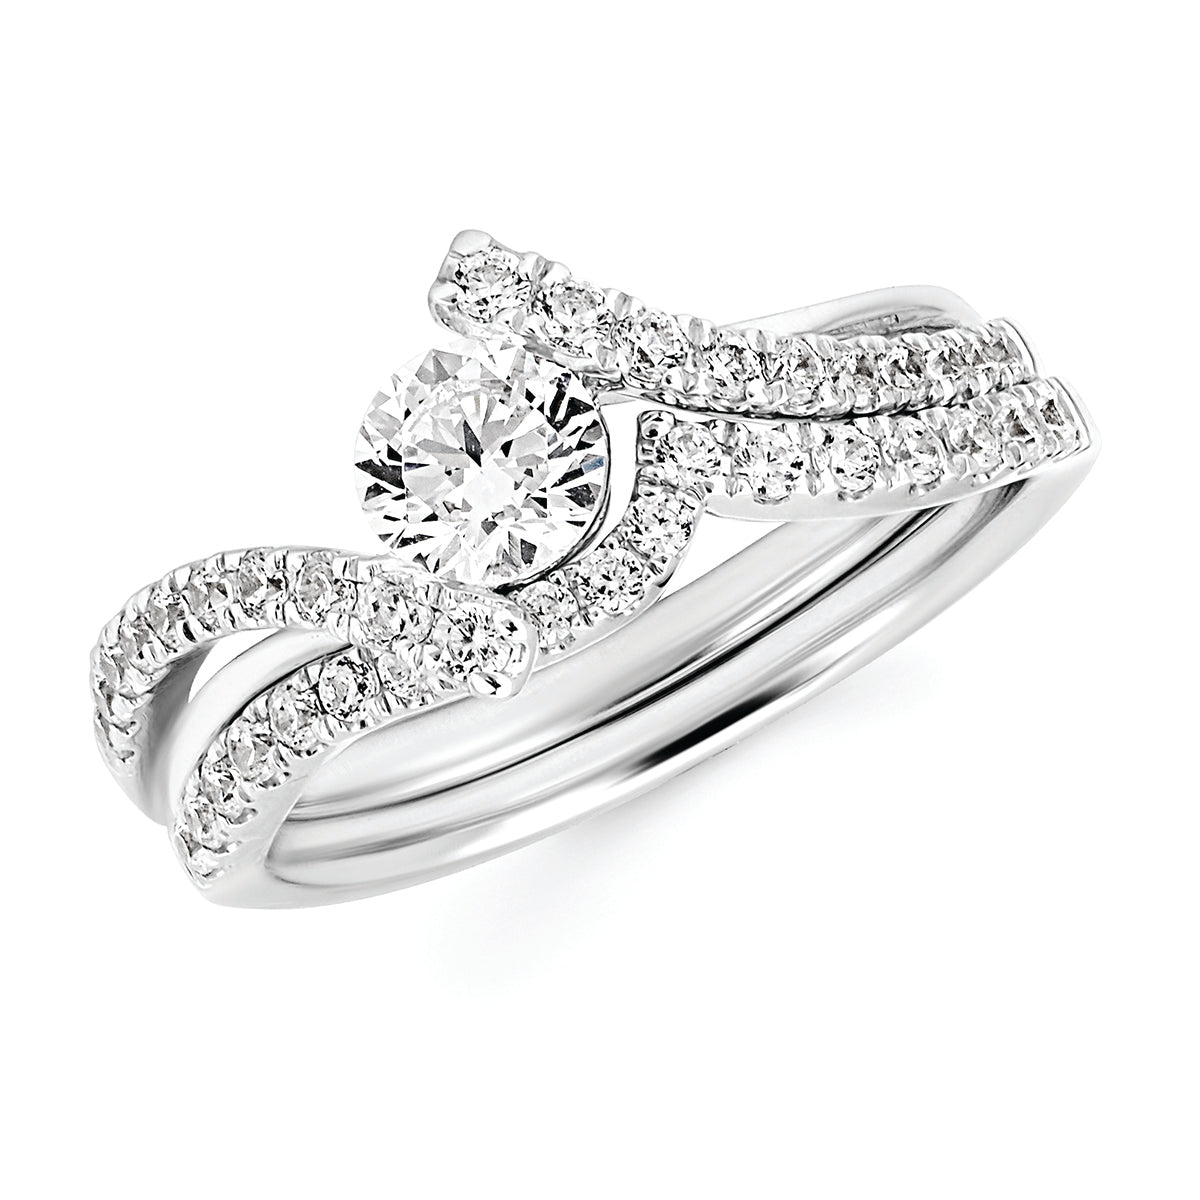 Modern Bridal: 1/5 Ctw. Diamond Semi Mount available for 3/8 Ct. Round Center Diamond in 14K Gold